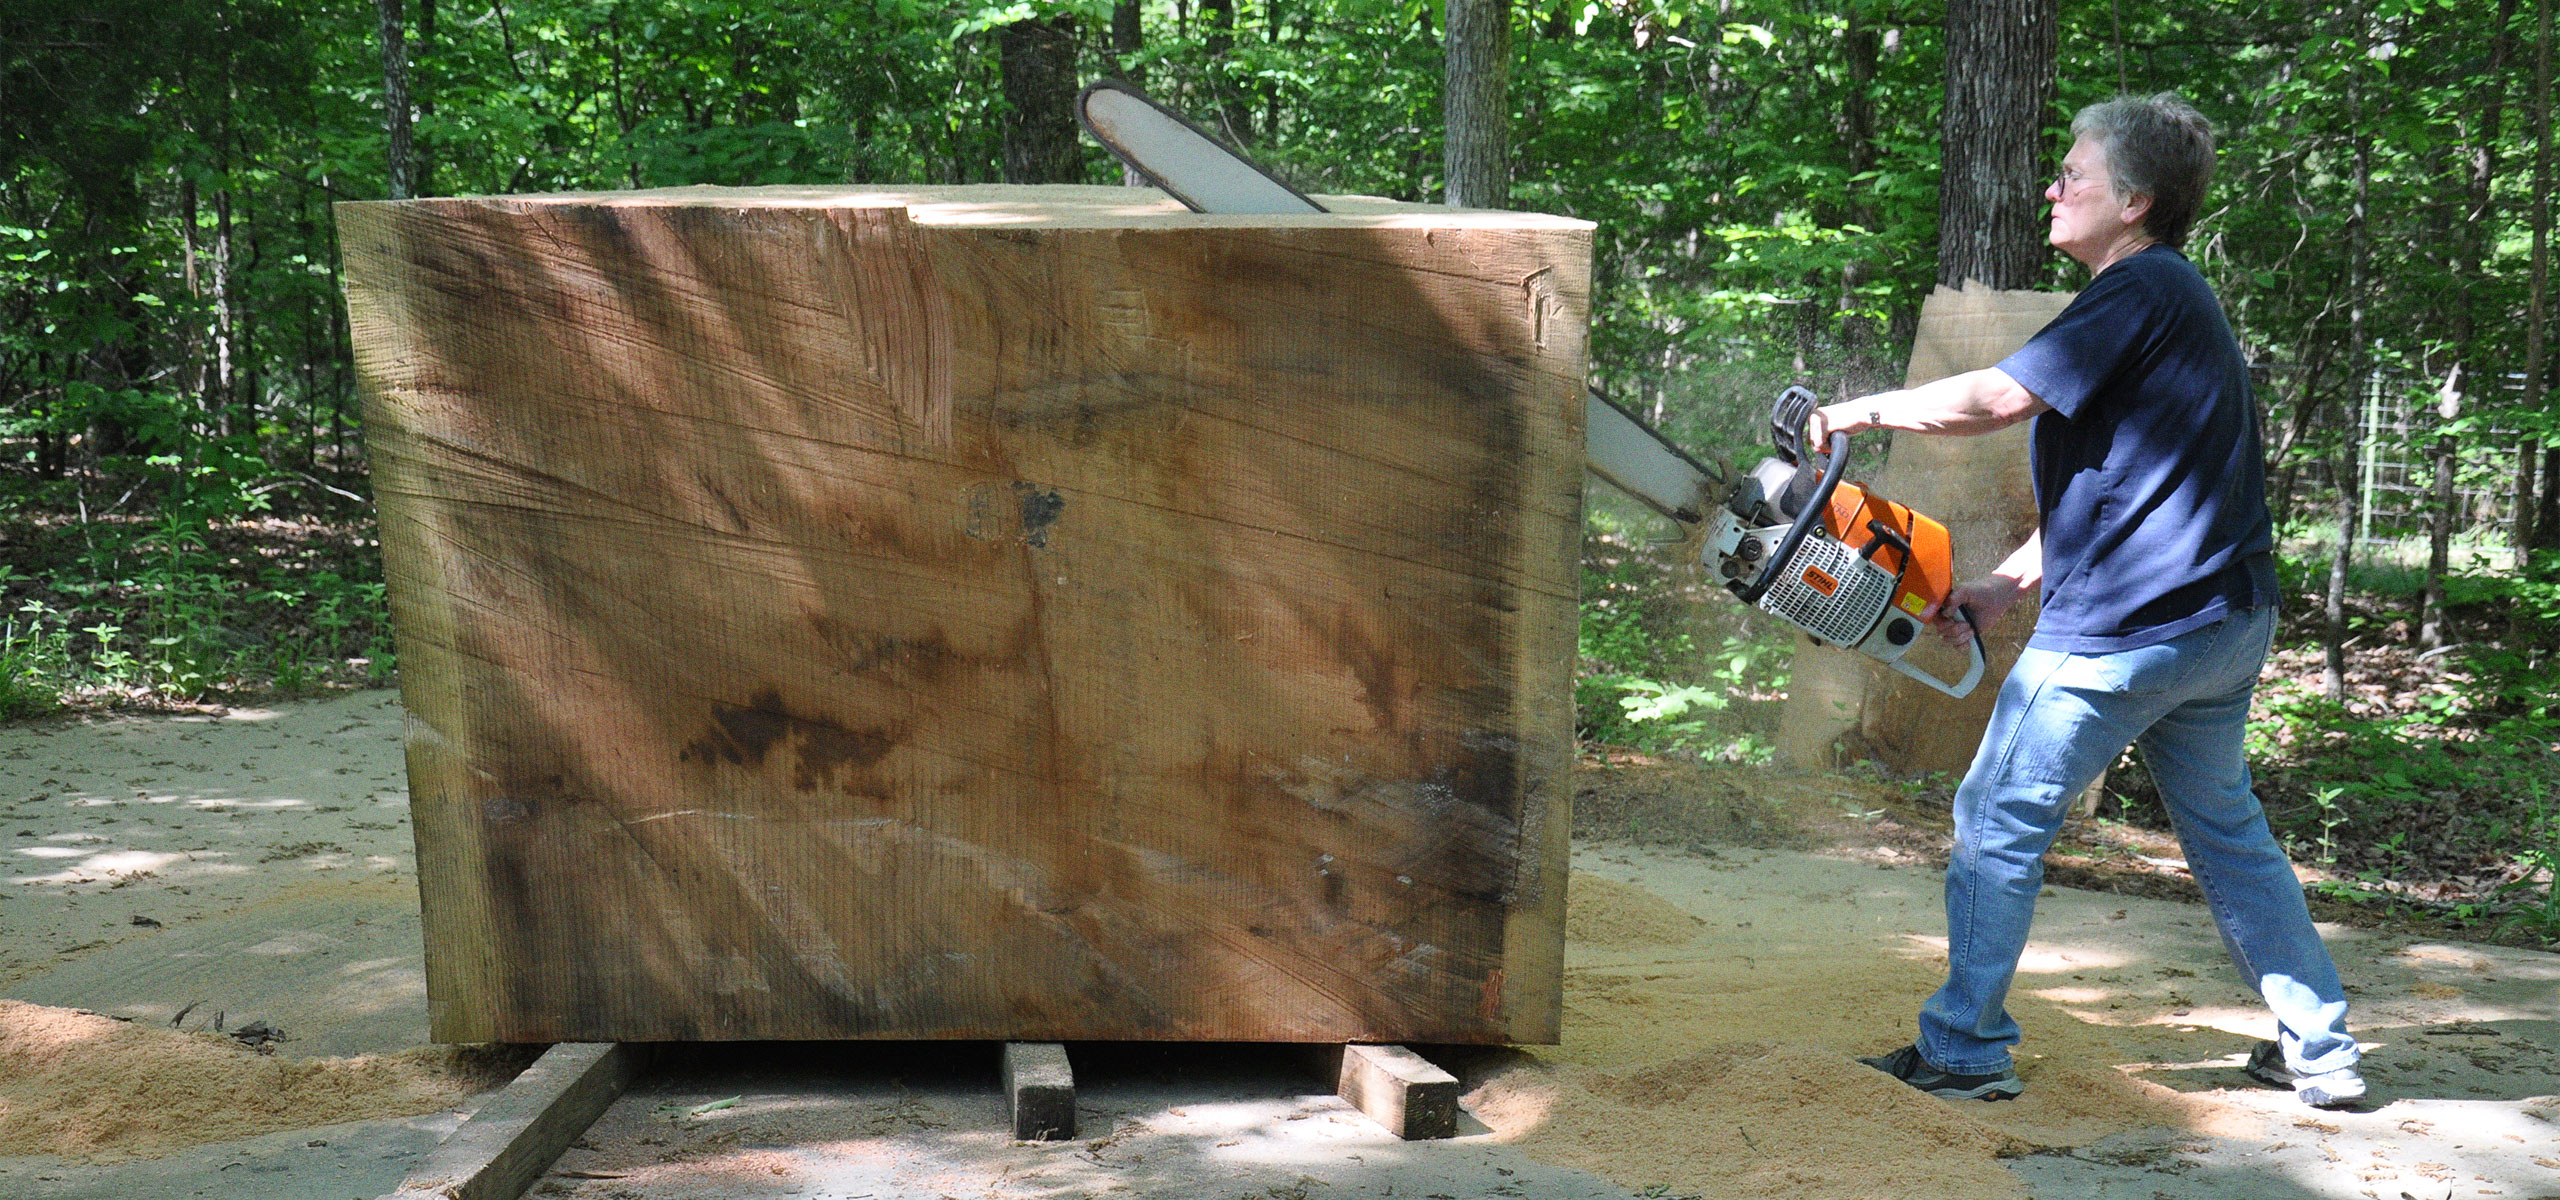 Robyn Horn sculpting with a chainsaw on a large block of wood